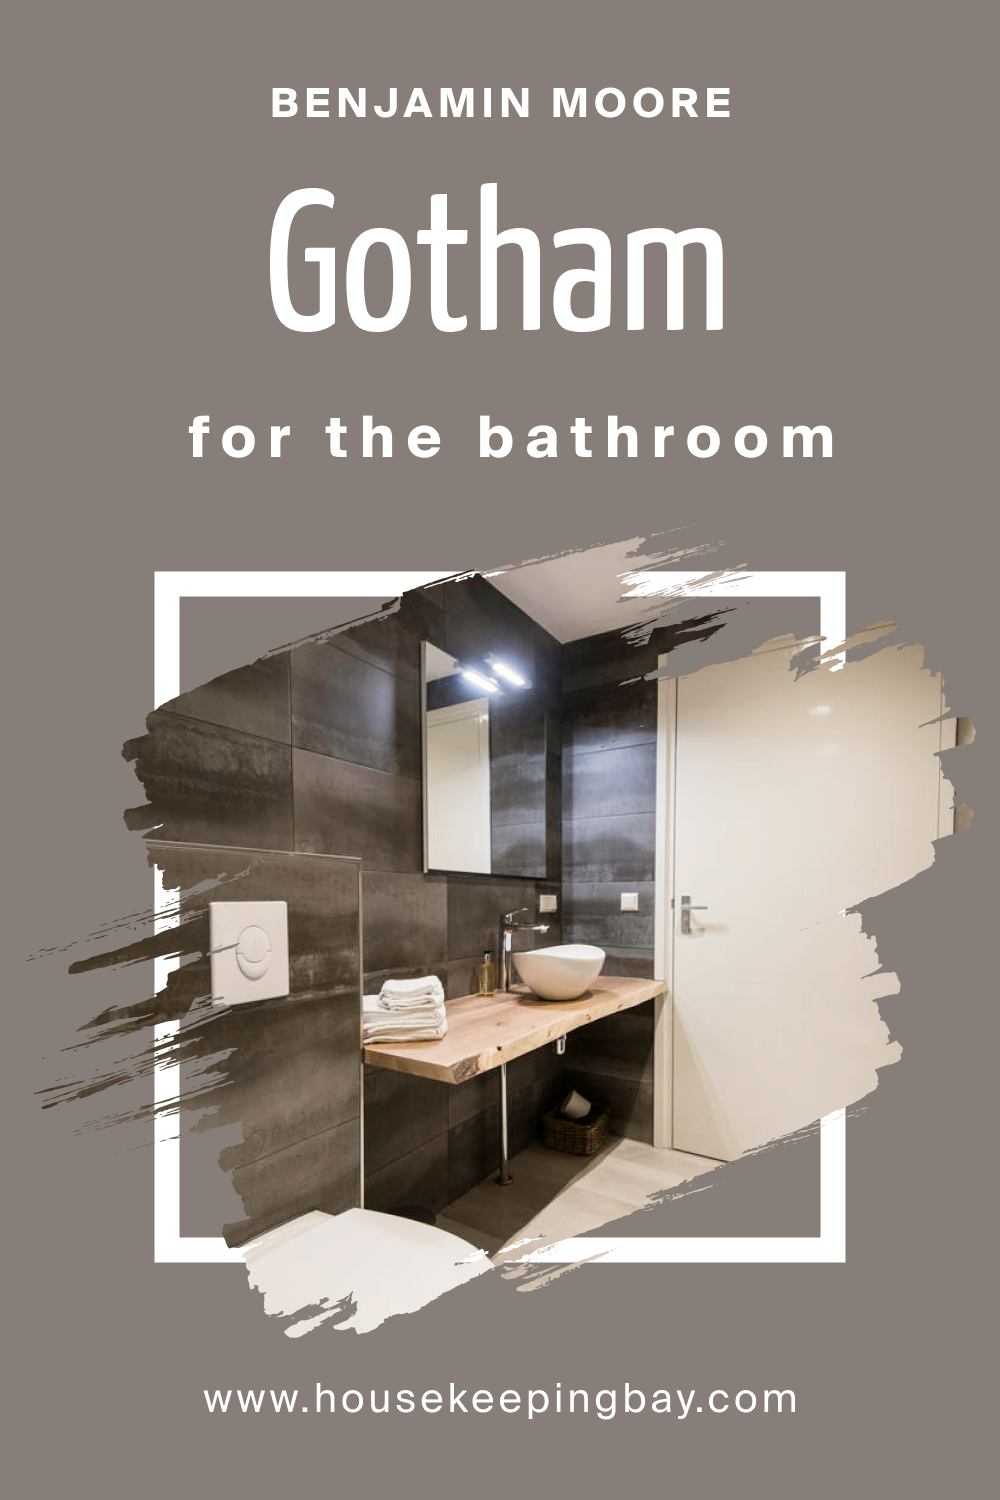 How to Use Gotham CSP-385 in the Bathroom?